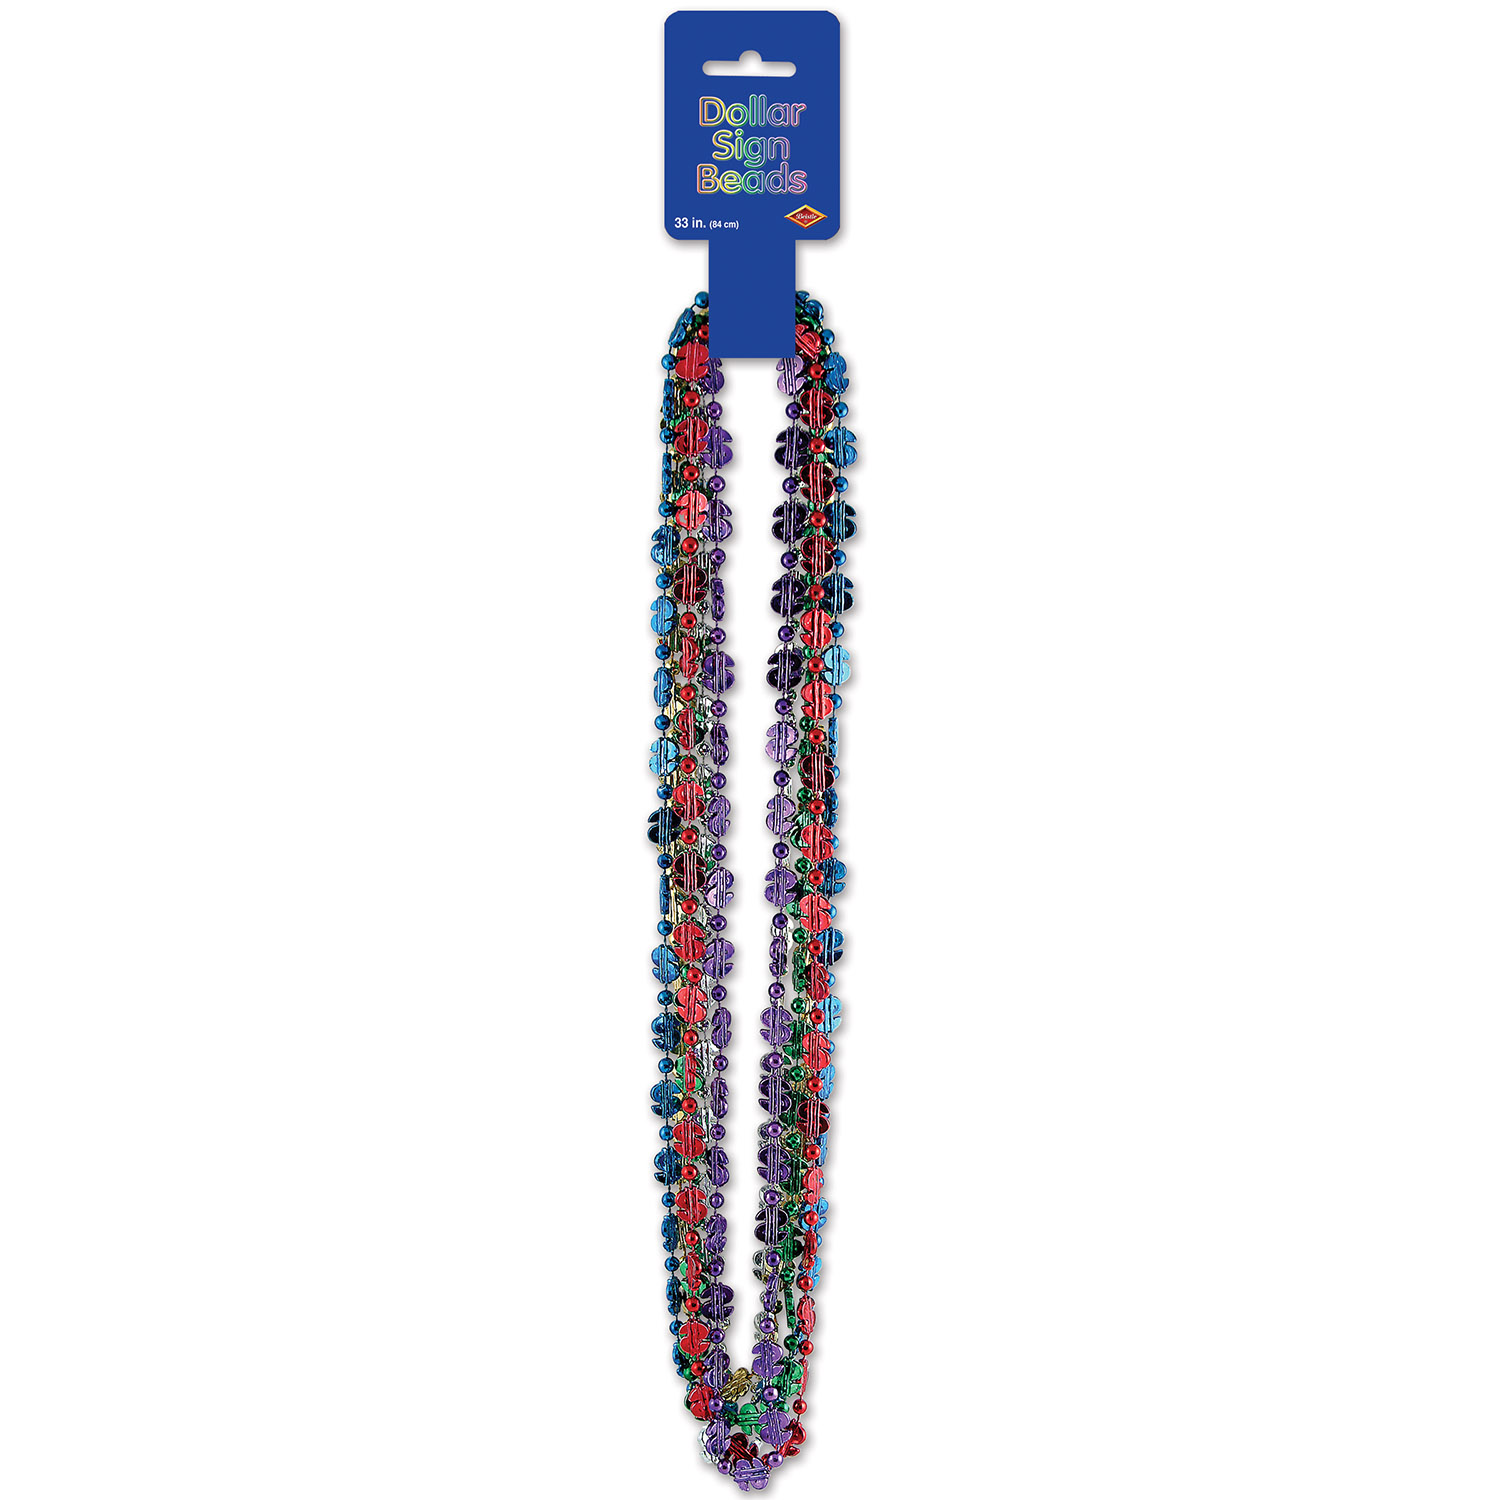 assortment of party beads that have dollar signs around the necklace in many colors